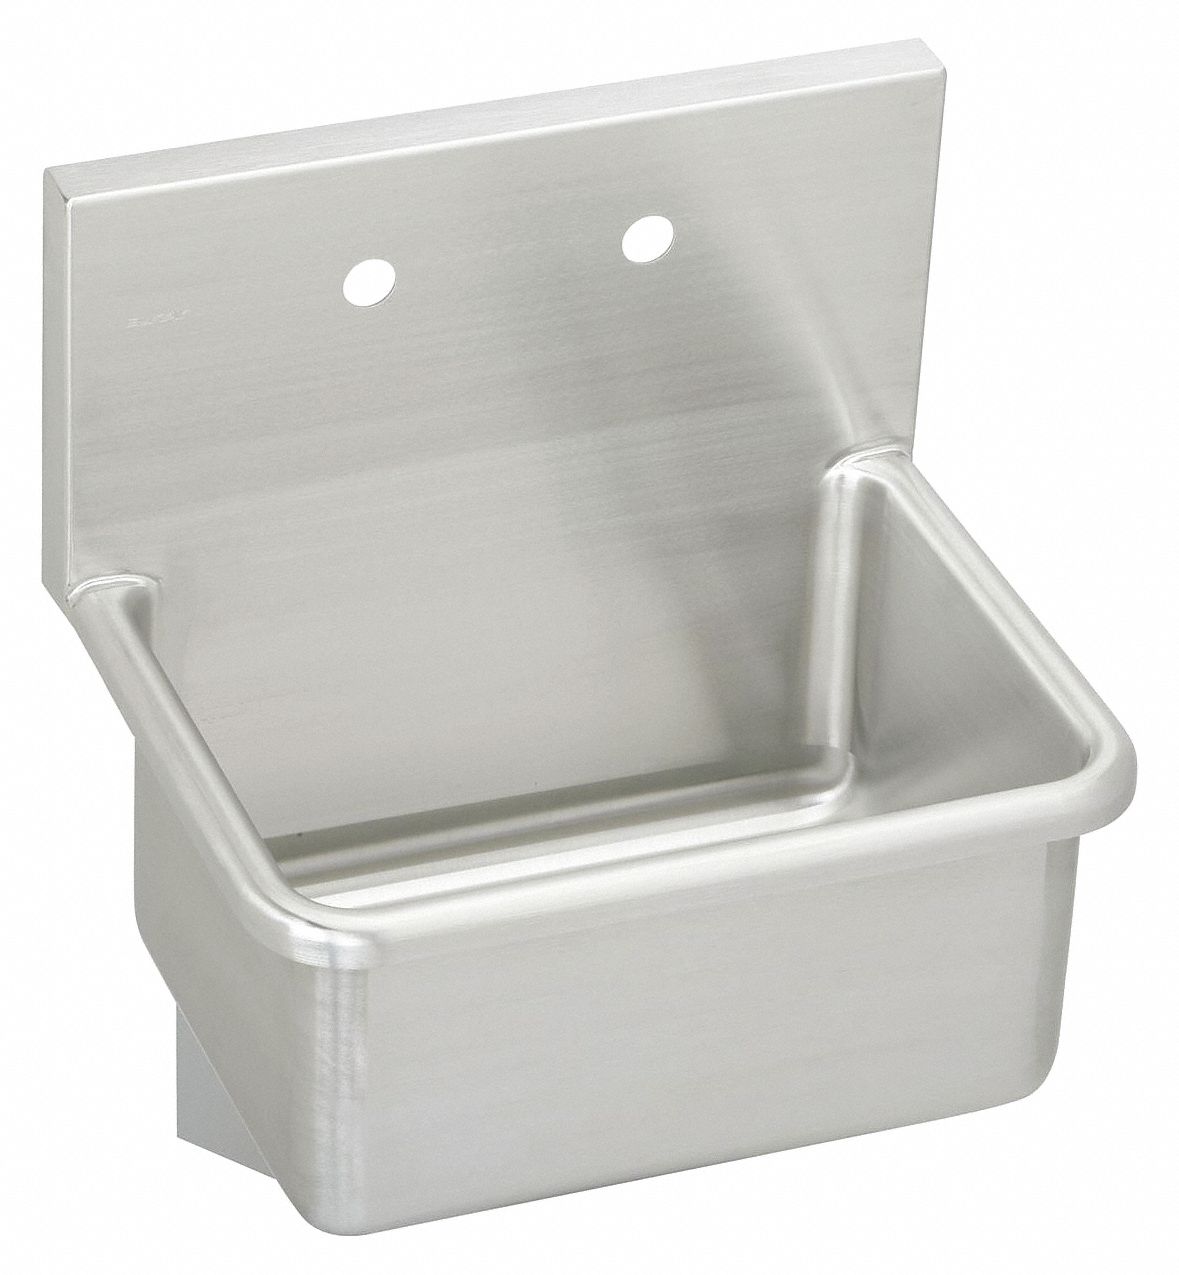 22 X 16 X 12 Utility Sinks And Laundry Tubs Grainger